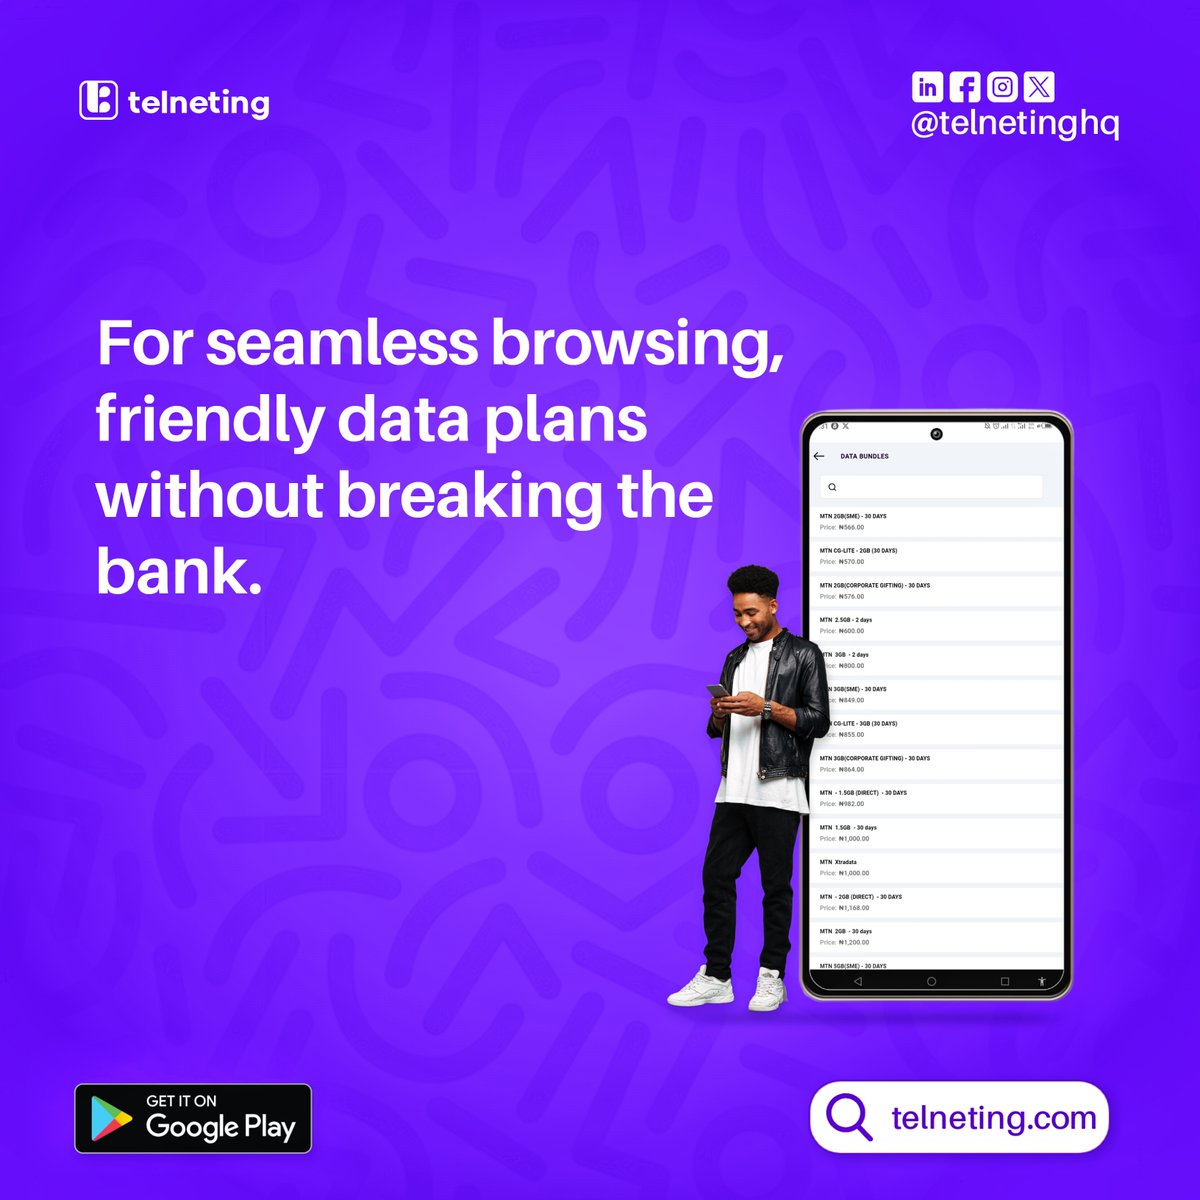 Choose Telneting for your discounted data subscription and stay connected without worries.

.
.
.

#Telneting #DataPlans #TGIF #Osim #friday